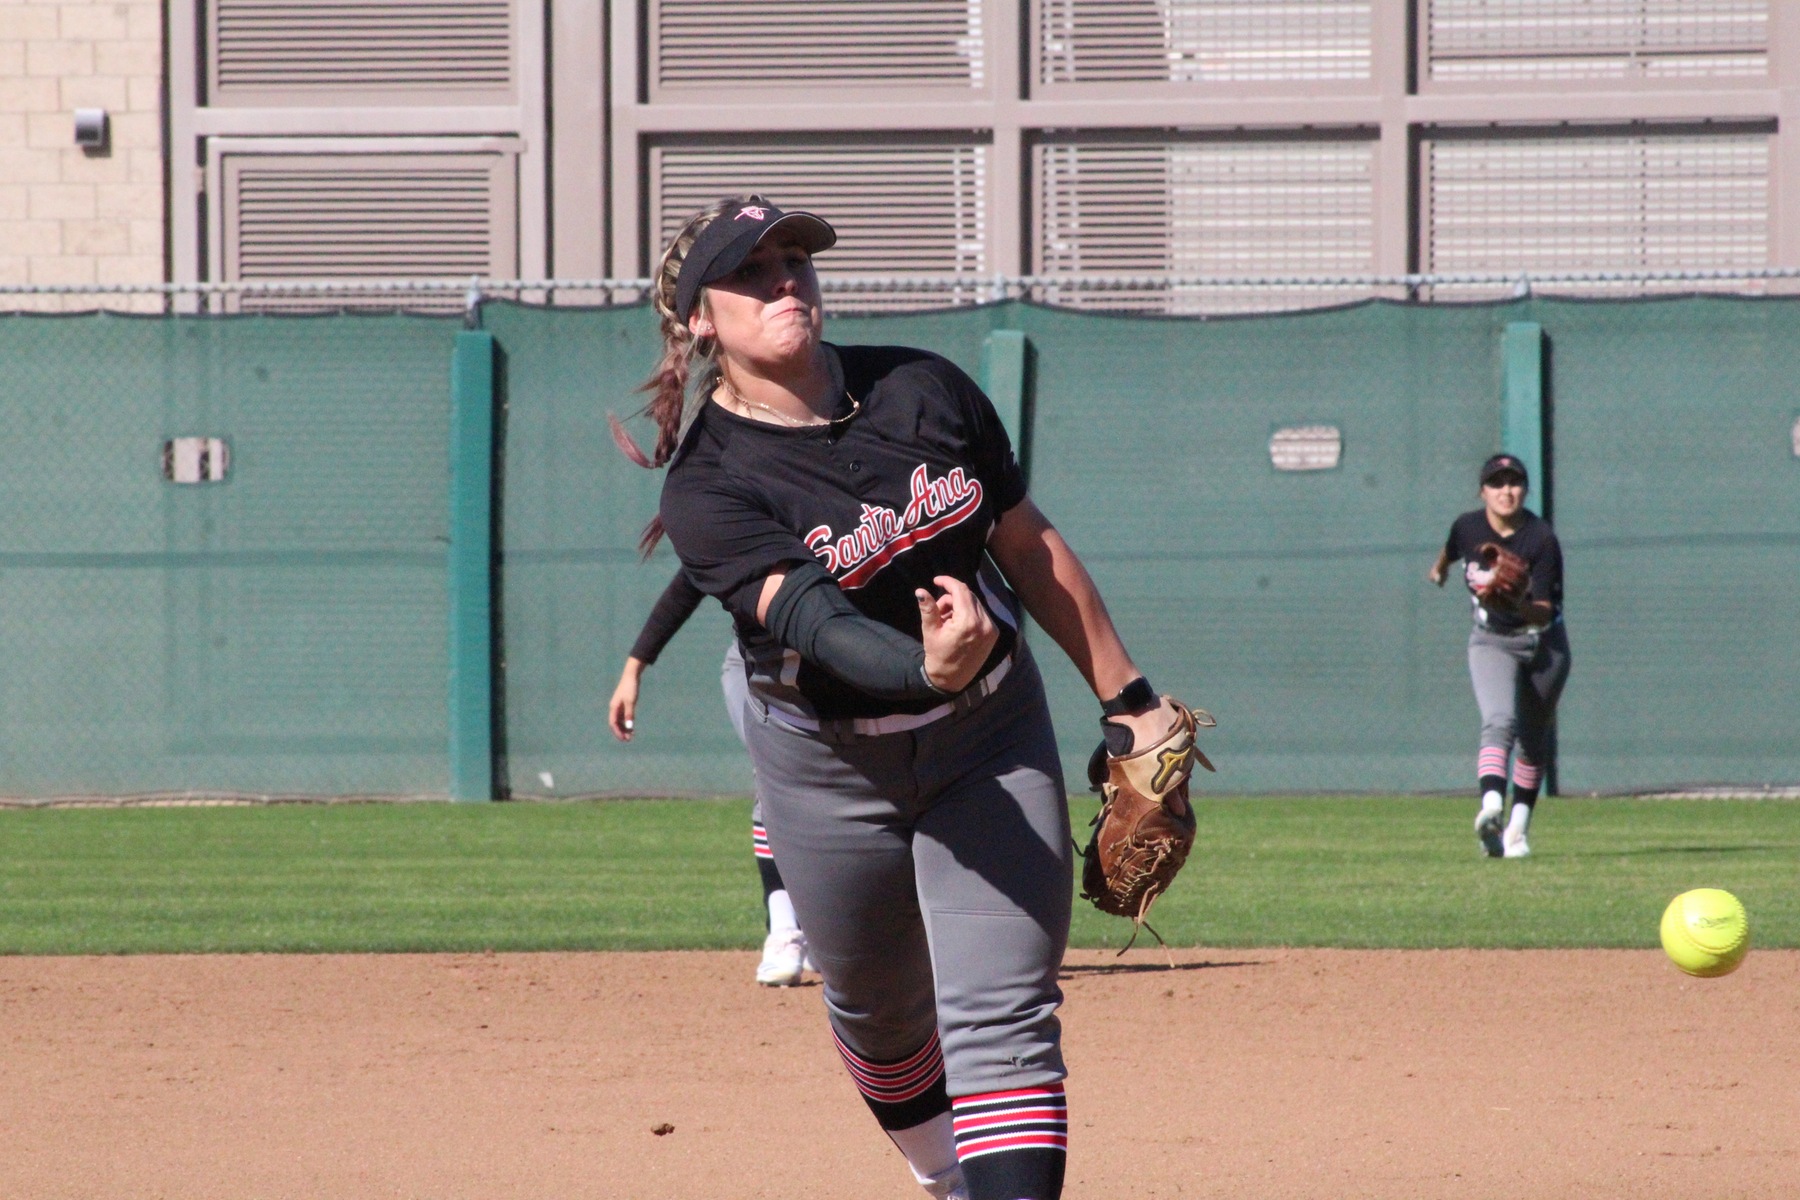 Rosas and Kirkpatrick Throw Combined No-Hitter, Dons Win 10-0